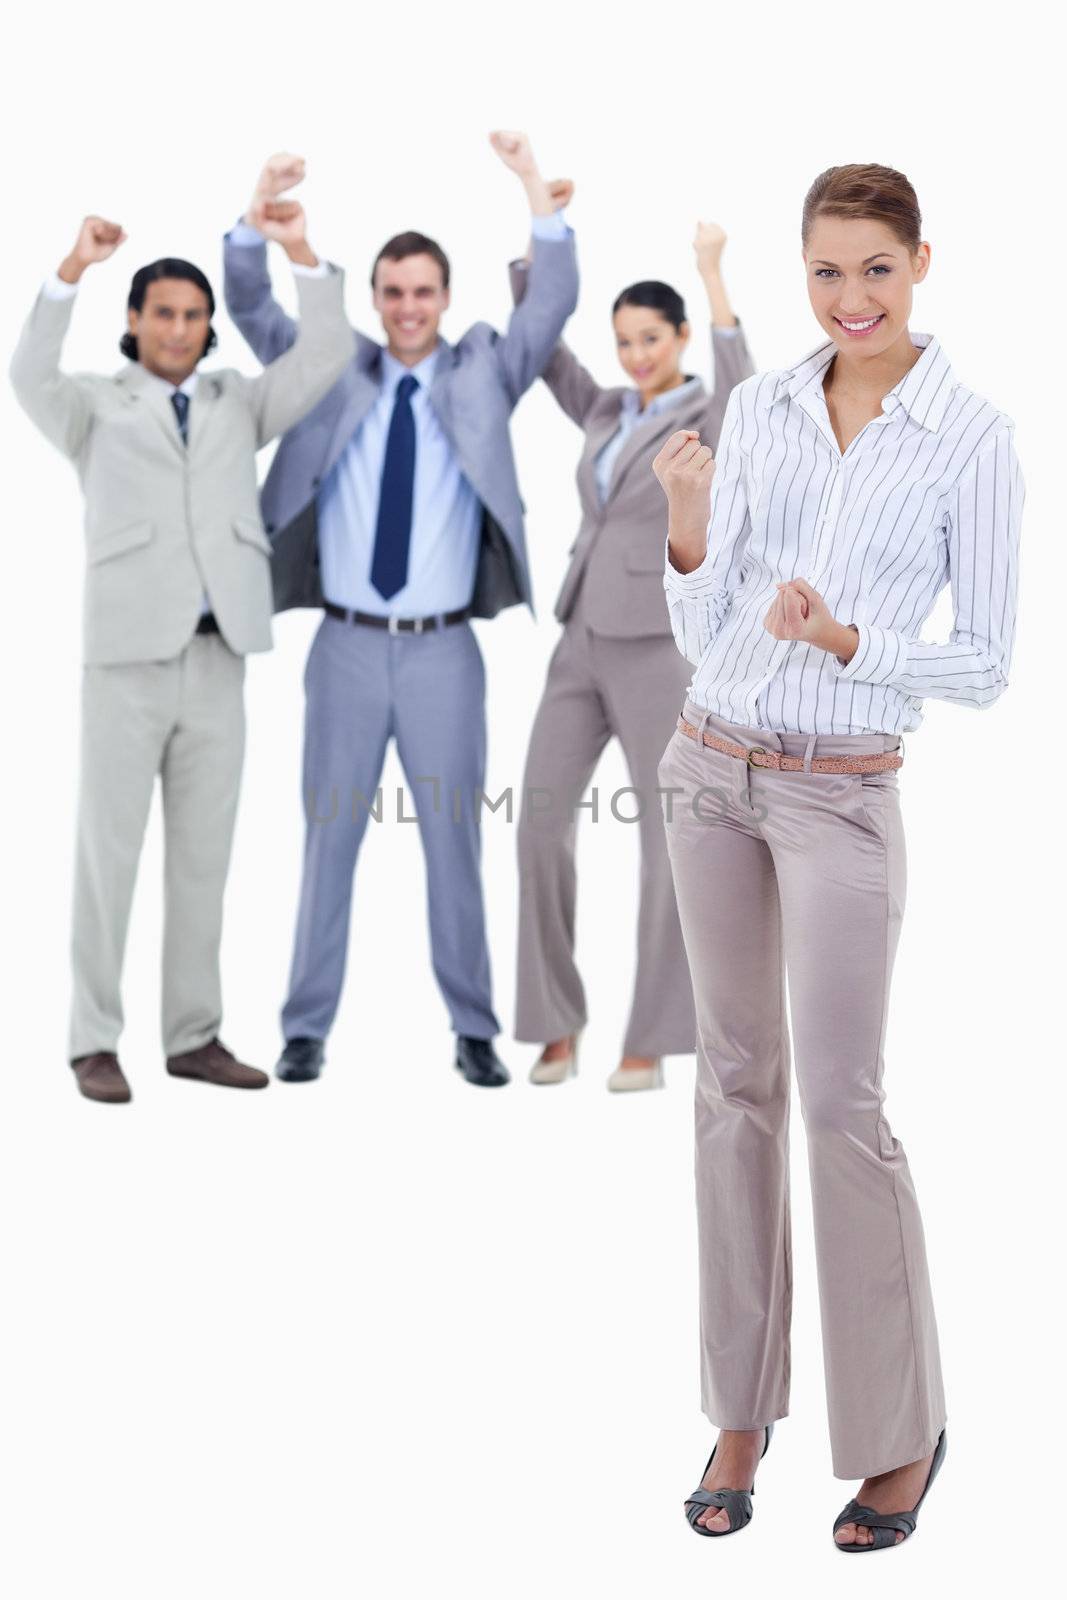 Secretary smiling and clenching her fists with very enthusiastic business people behind her against white background